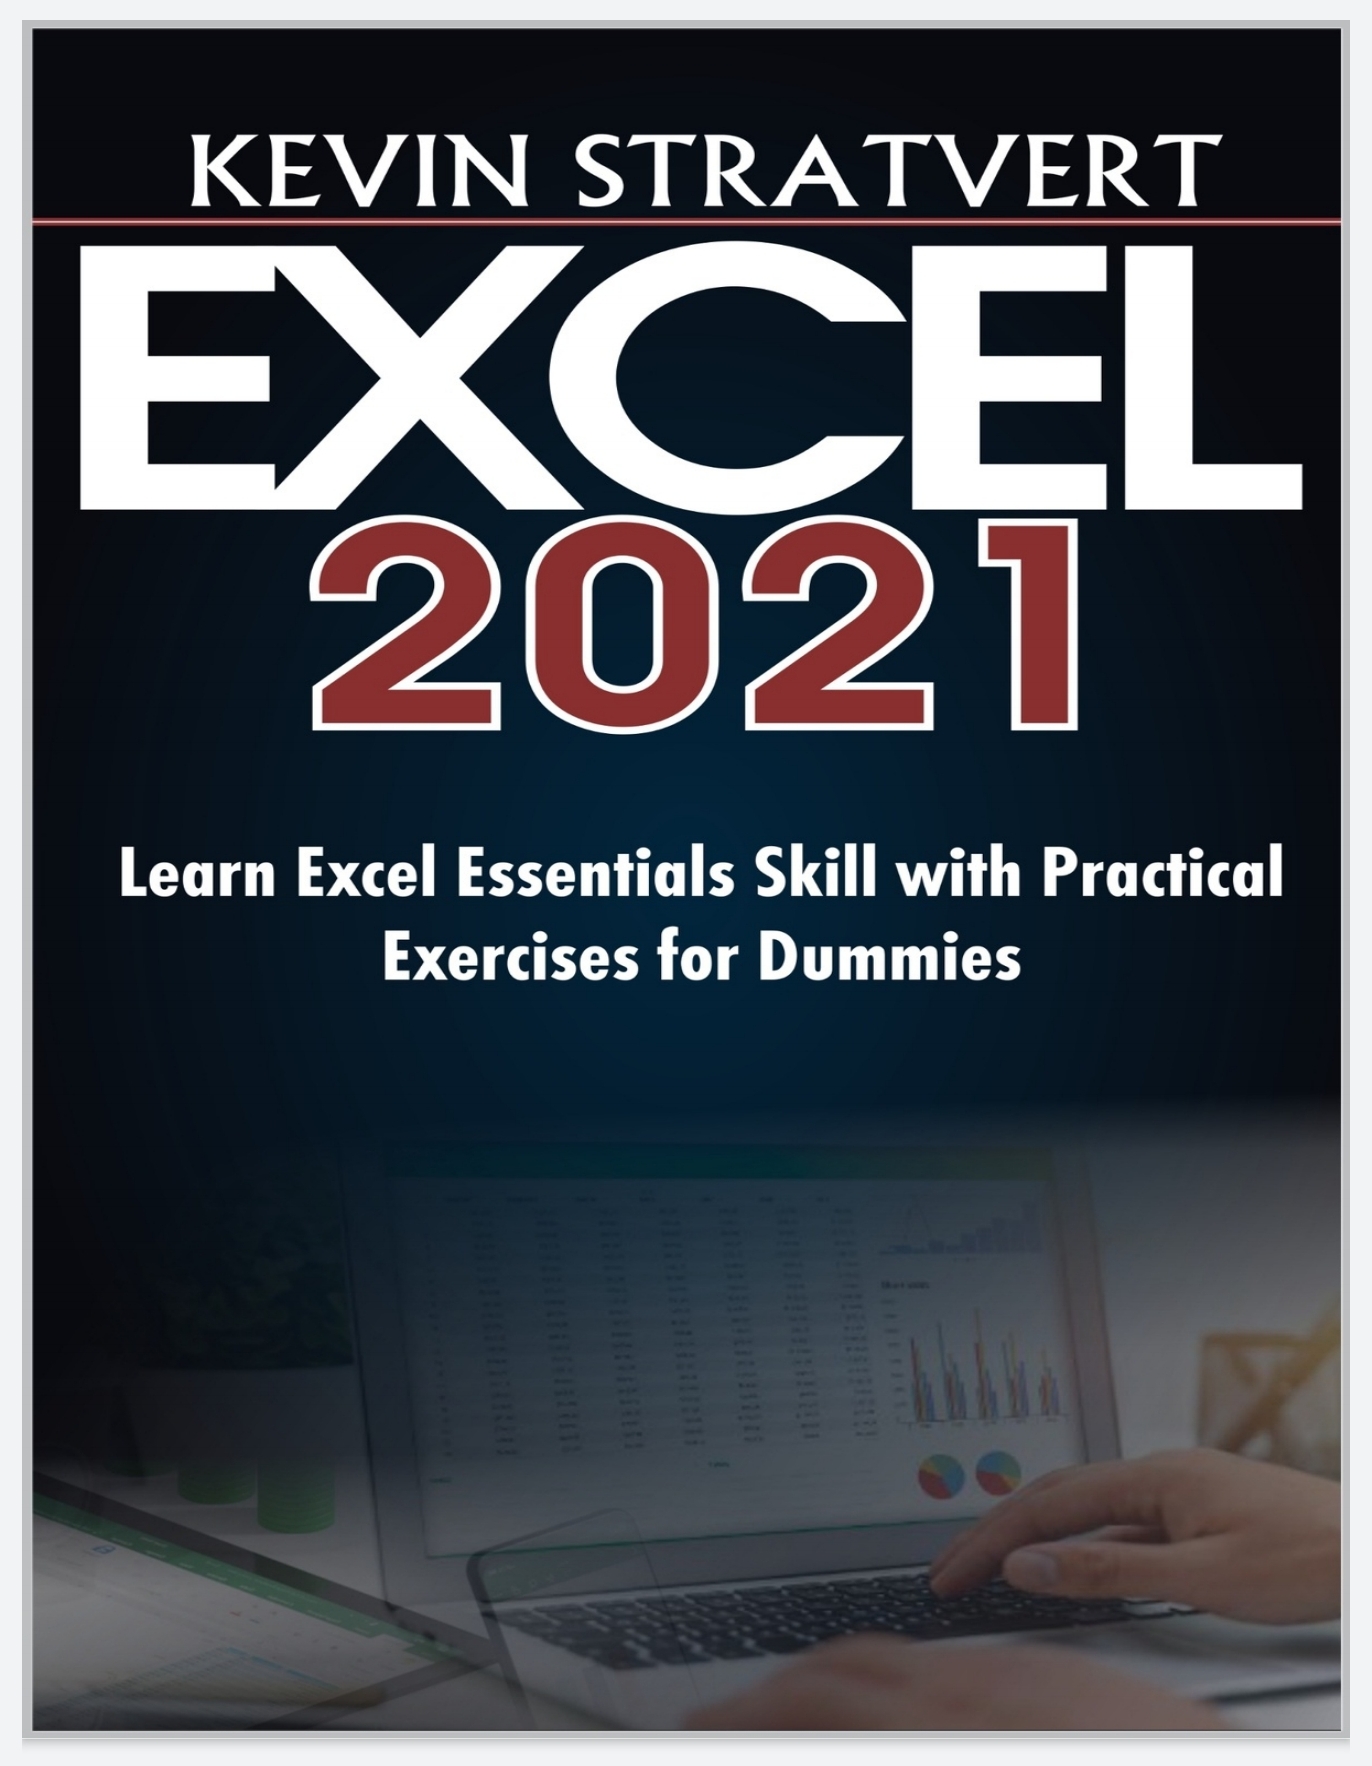 EXCEL 2021: Learn Excel Essentials Skill with Practical Exercises for Dummies